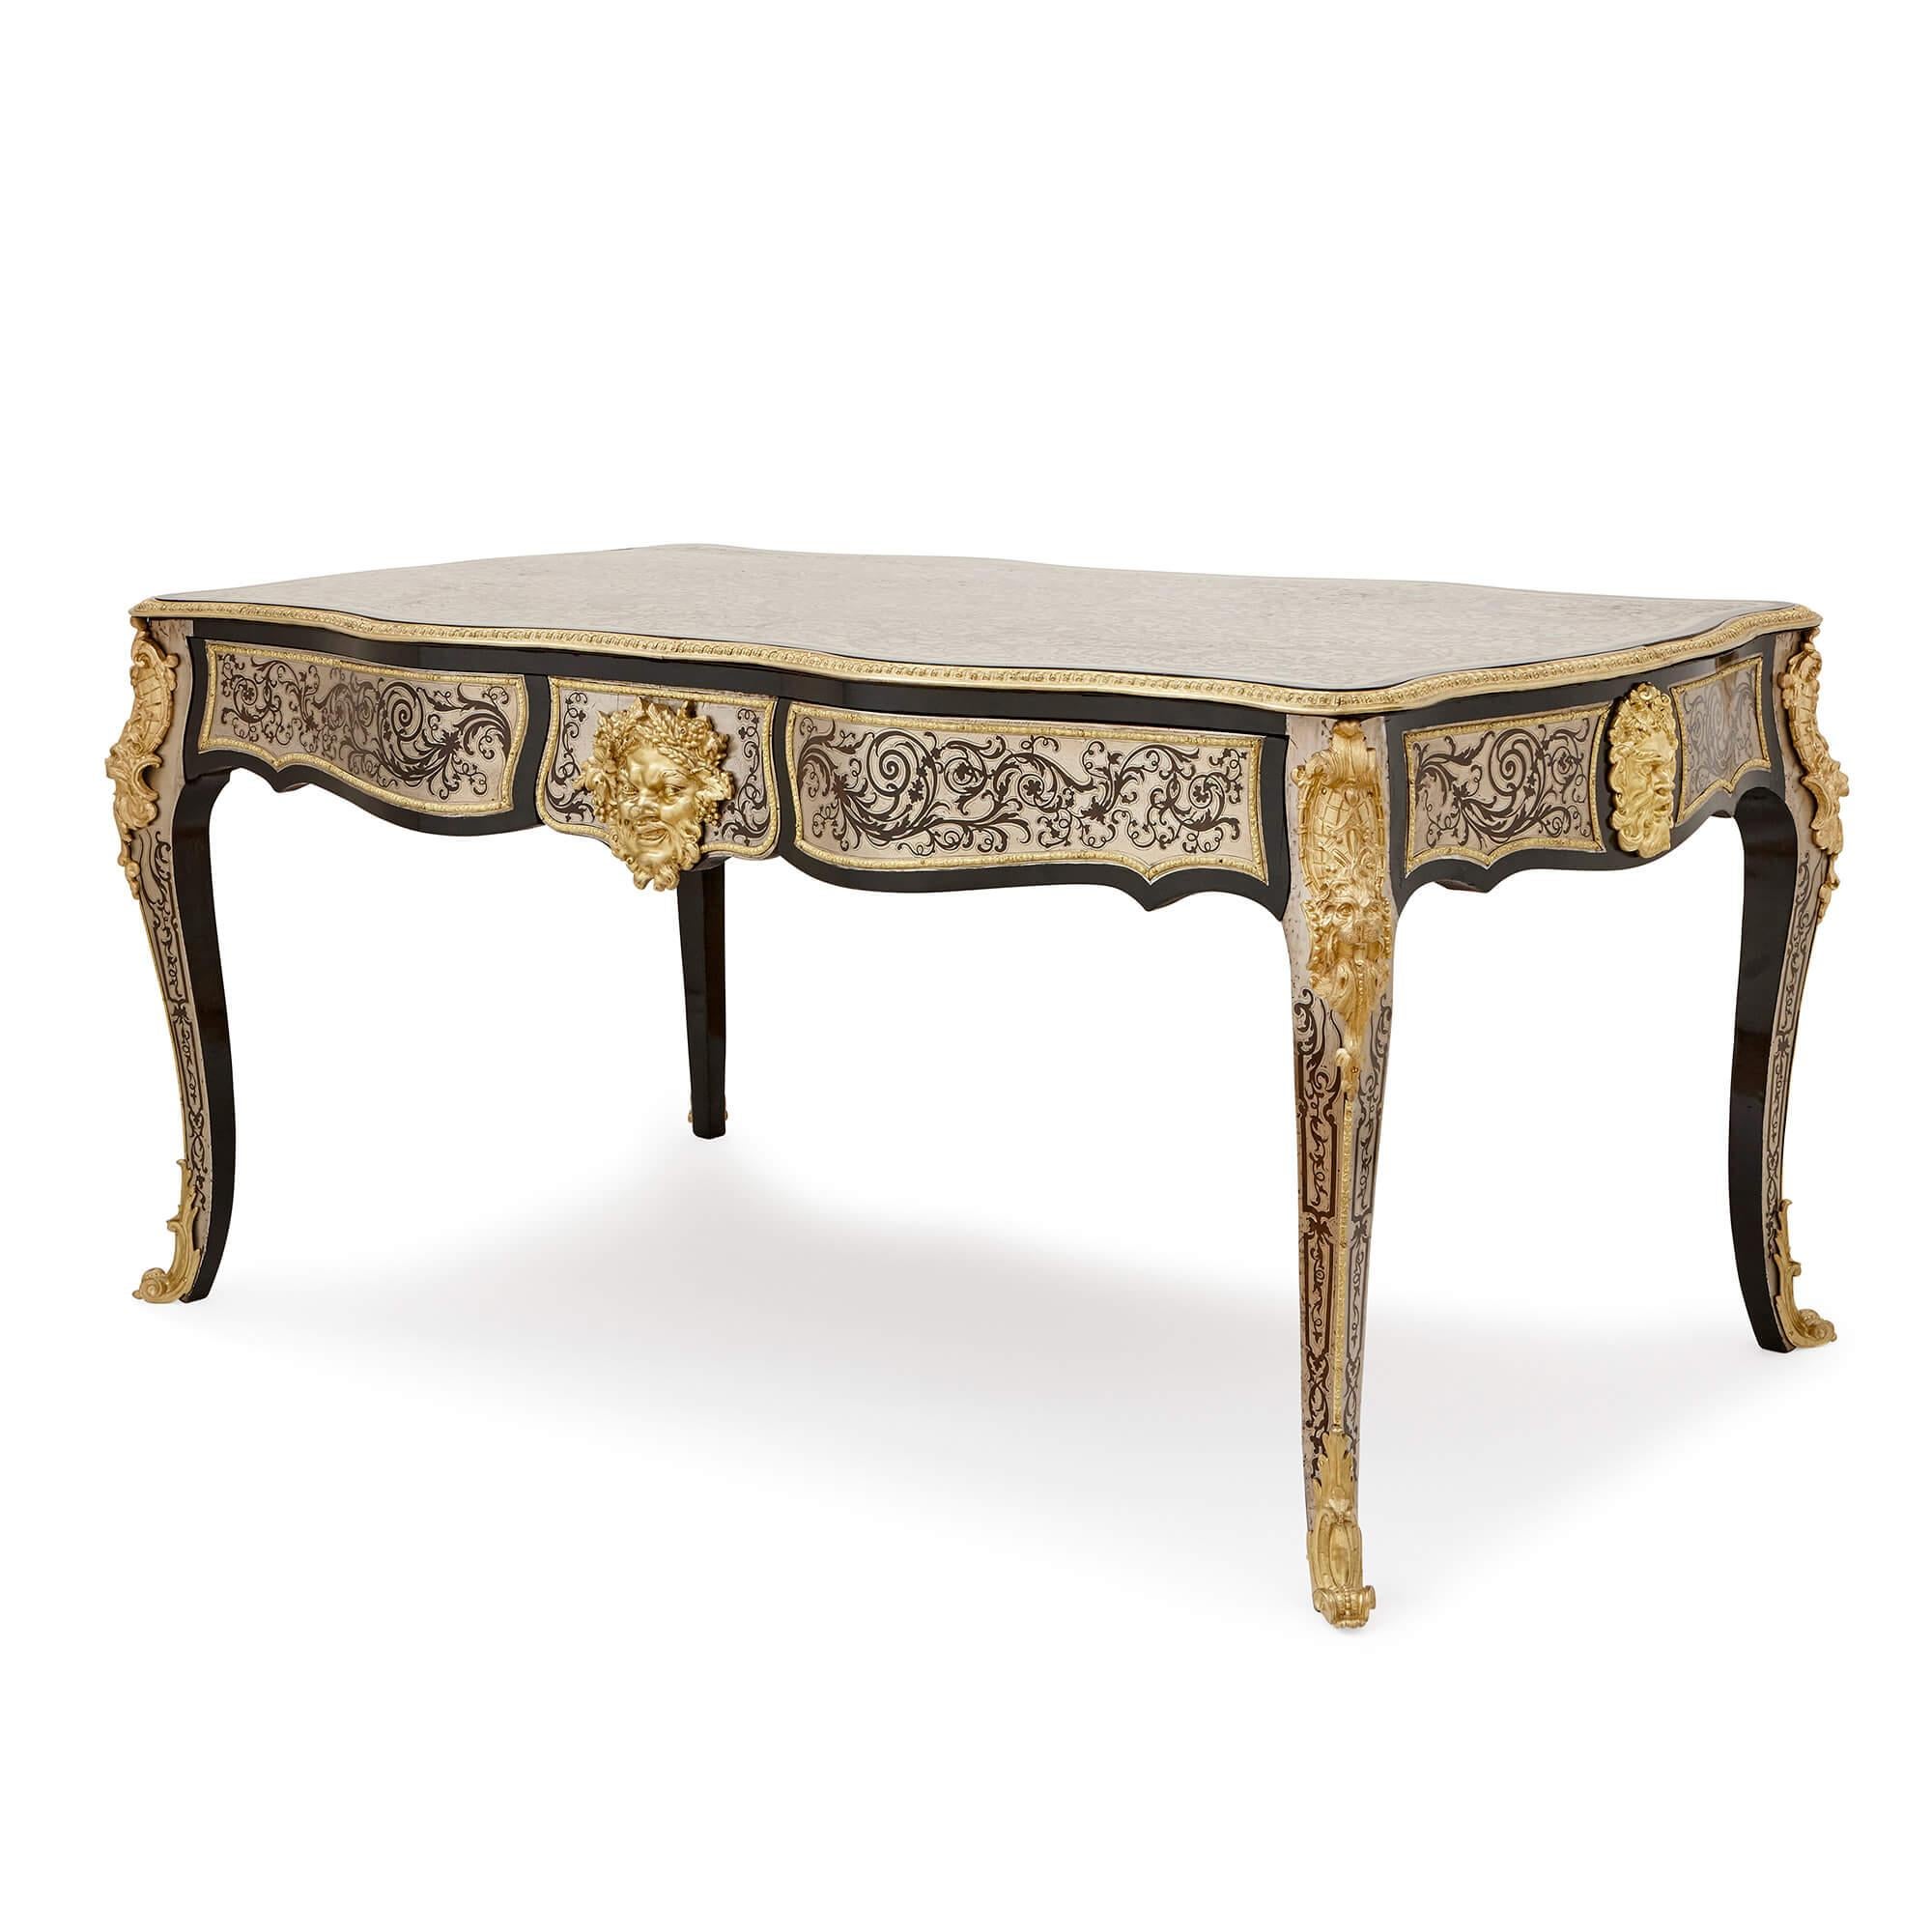 This splendid writing desk is an example of skilled craftsmanship of the highest order, and features some breathtakingly complex Boulle work all around its surface. The tabletop is particularly remarkable, showing a veneer of intricately-cut pieces